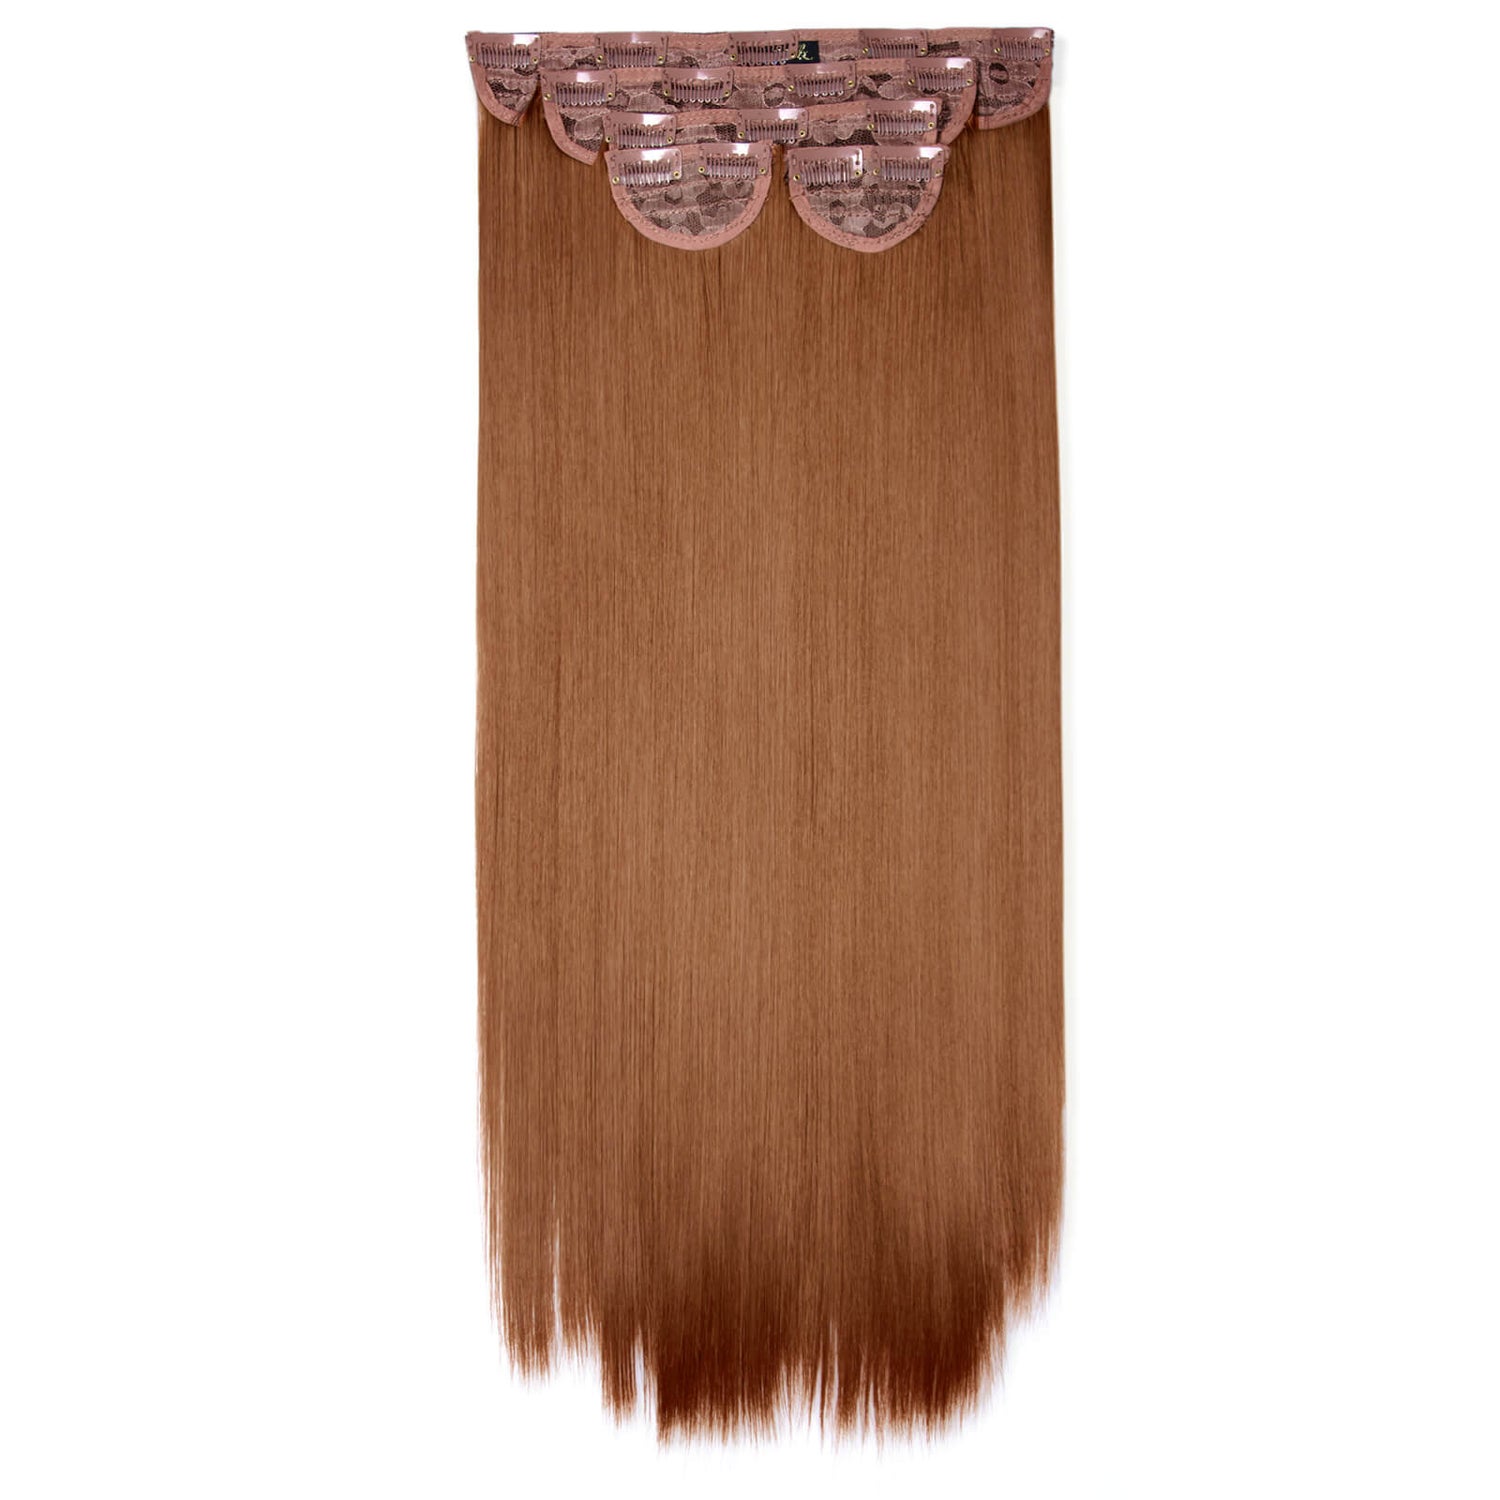 LullaBellz Super Thick 22" 5 Piece Straight Clip In Extensions (Various Shades)